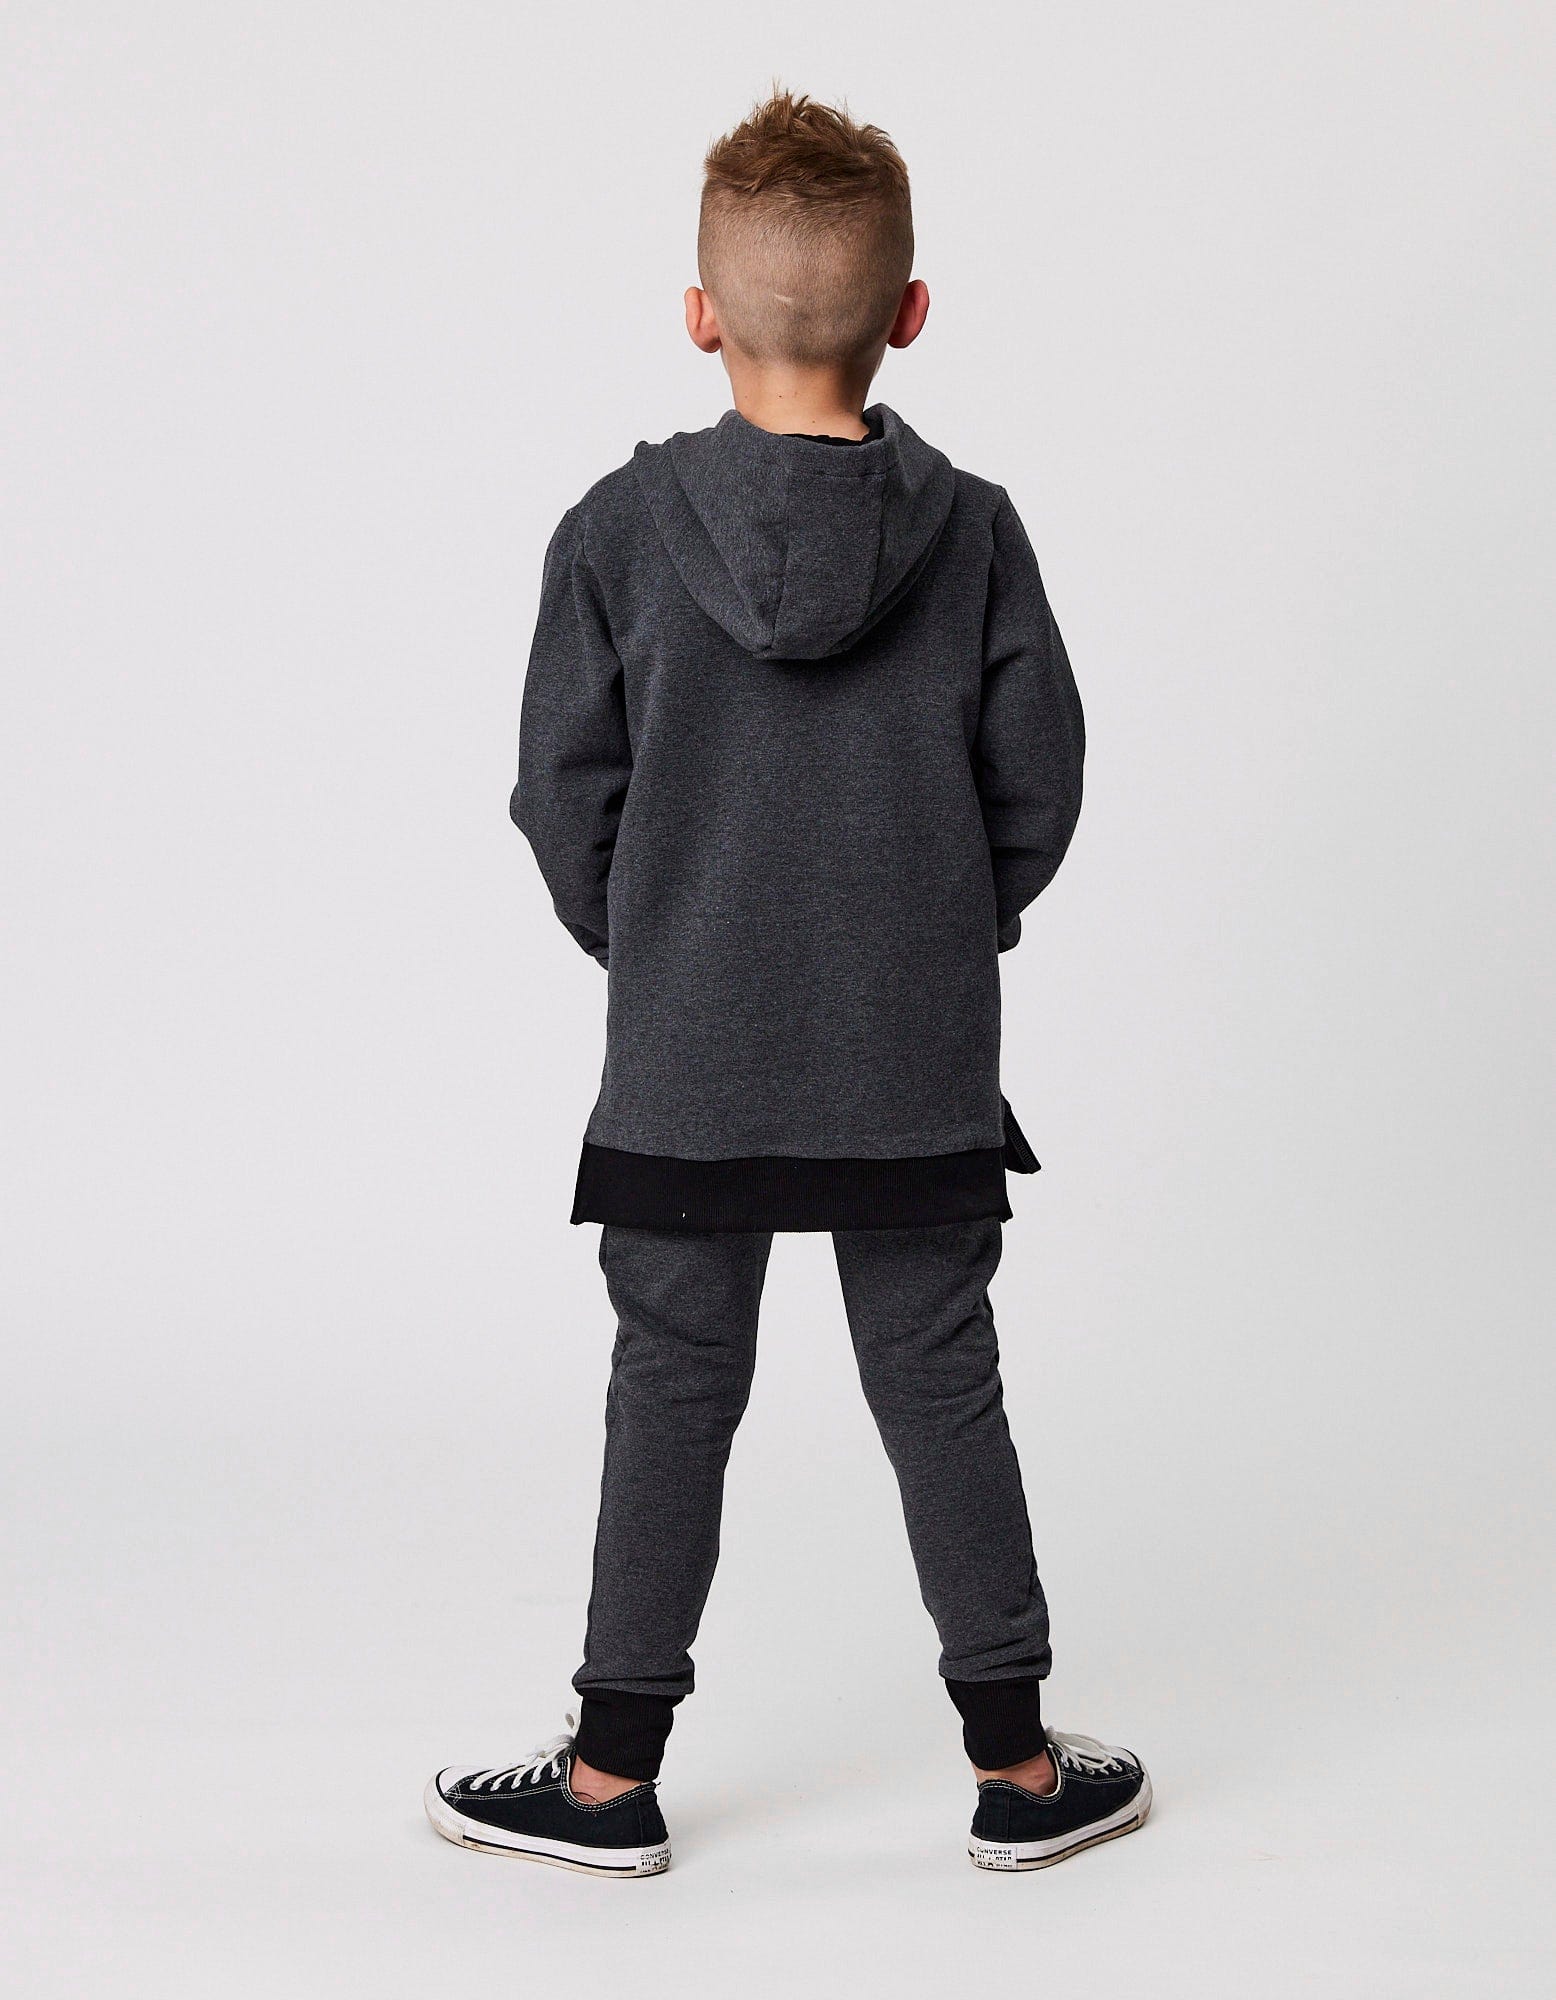 Rad Tribe Unisex Jumper Tribe Hood In Charcoal